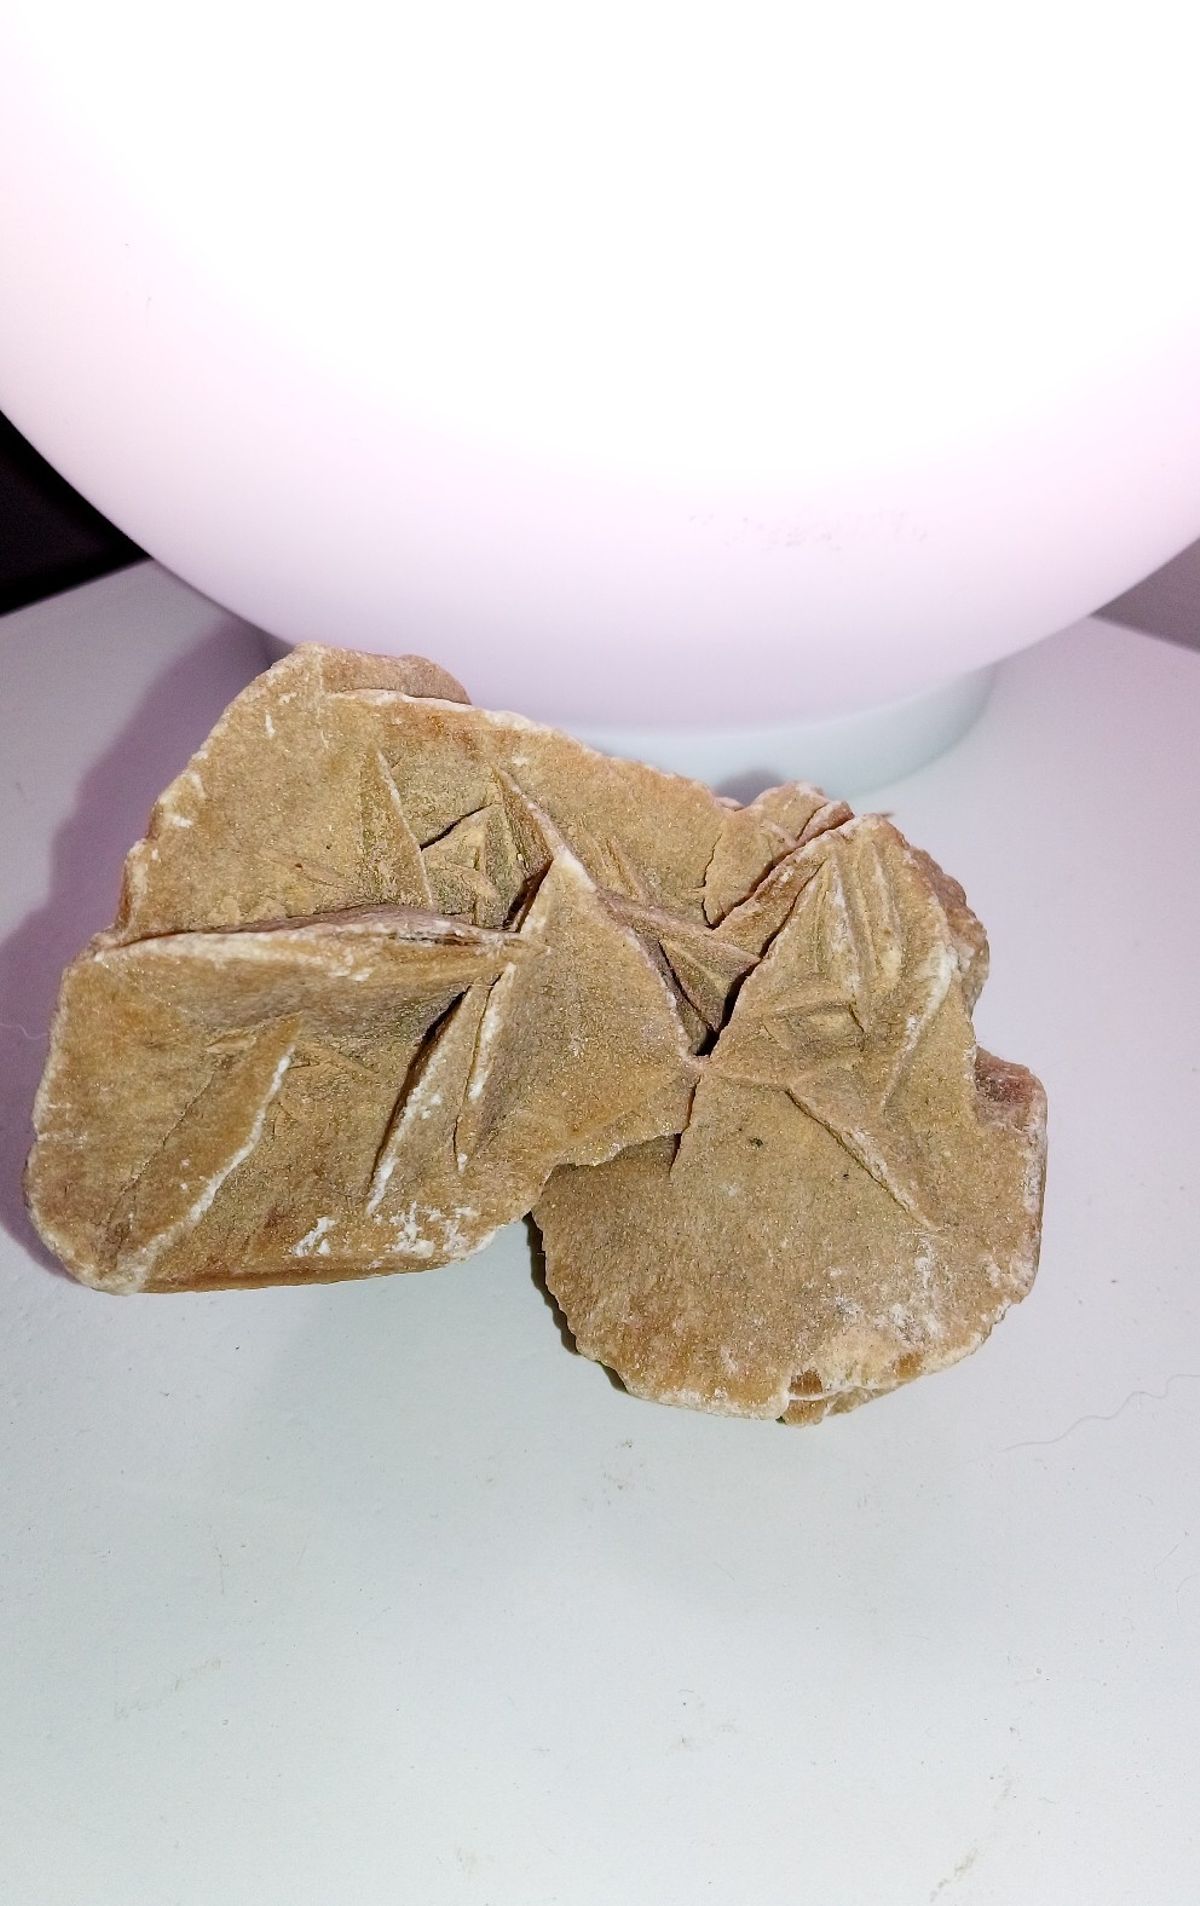 Facts About Desert Rose Crystal: Meanings, Properties, and Benefits